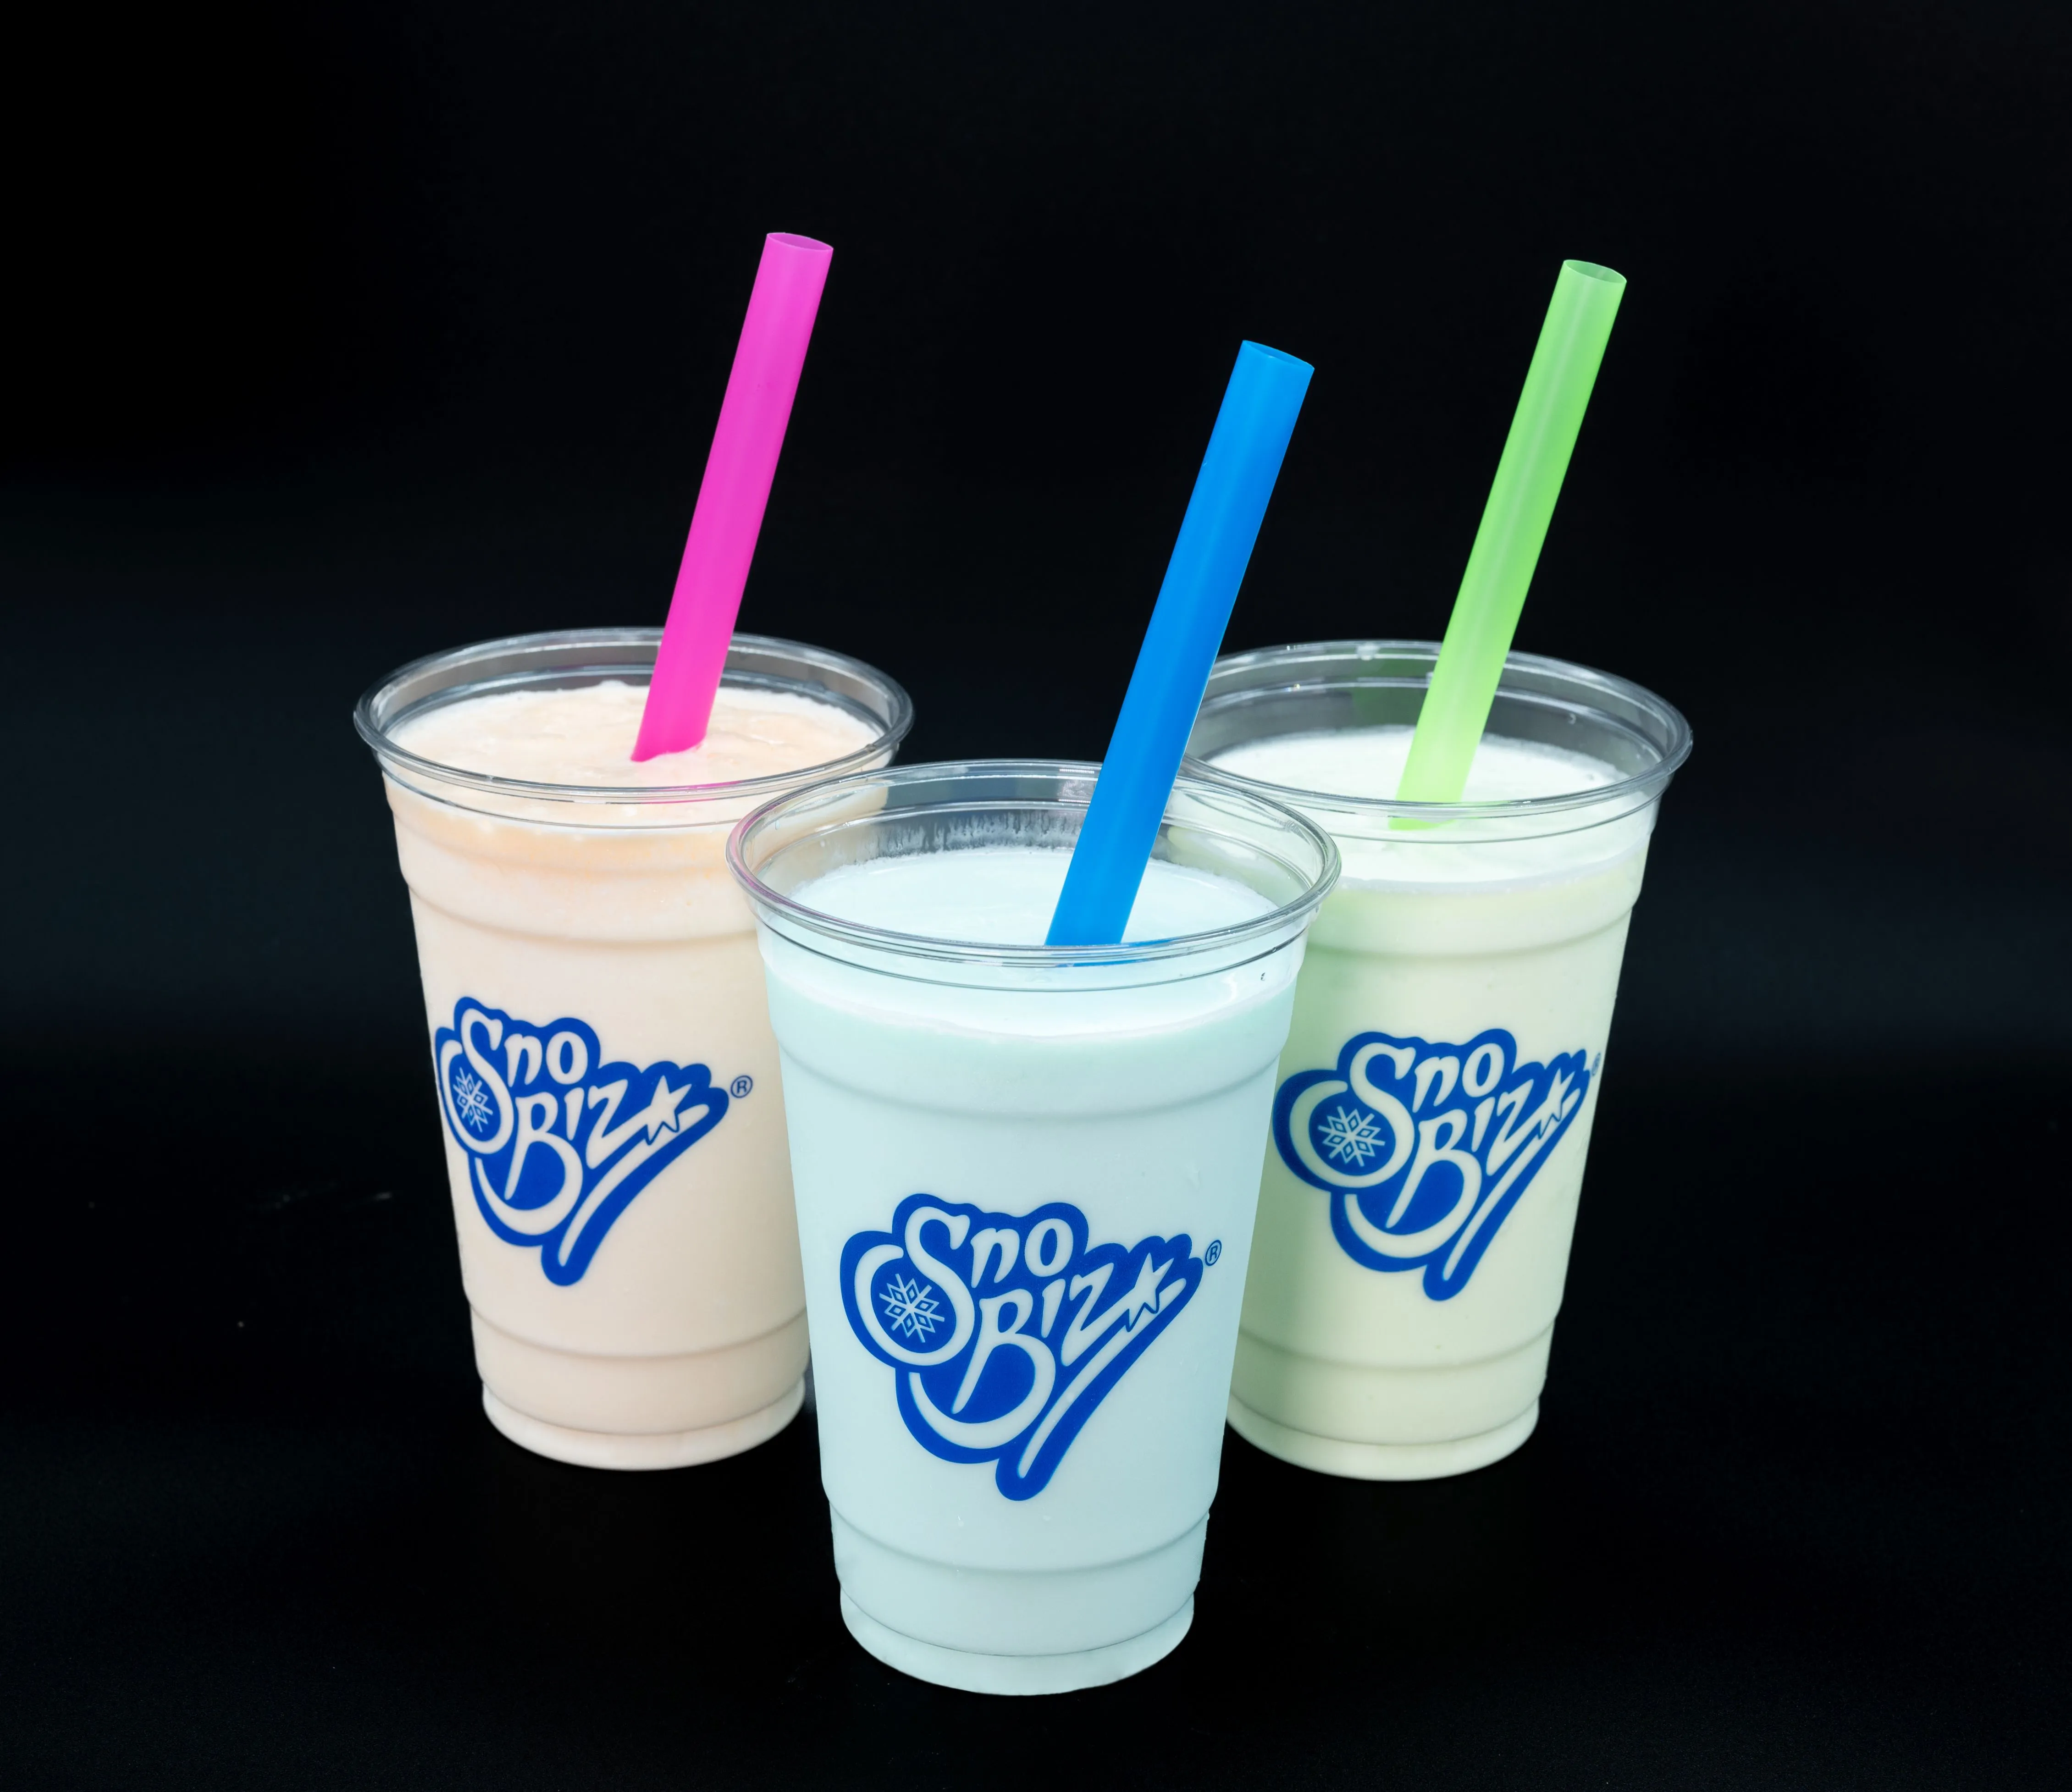 Three cups of Sno Biz shaved ice beverages with different flavors, each with a colorful straw, on a black background.